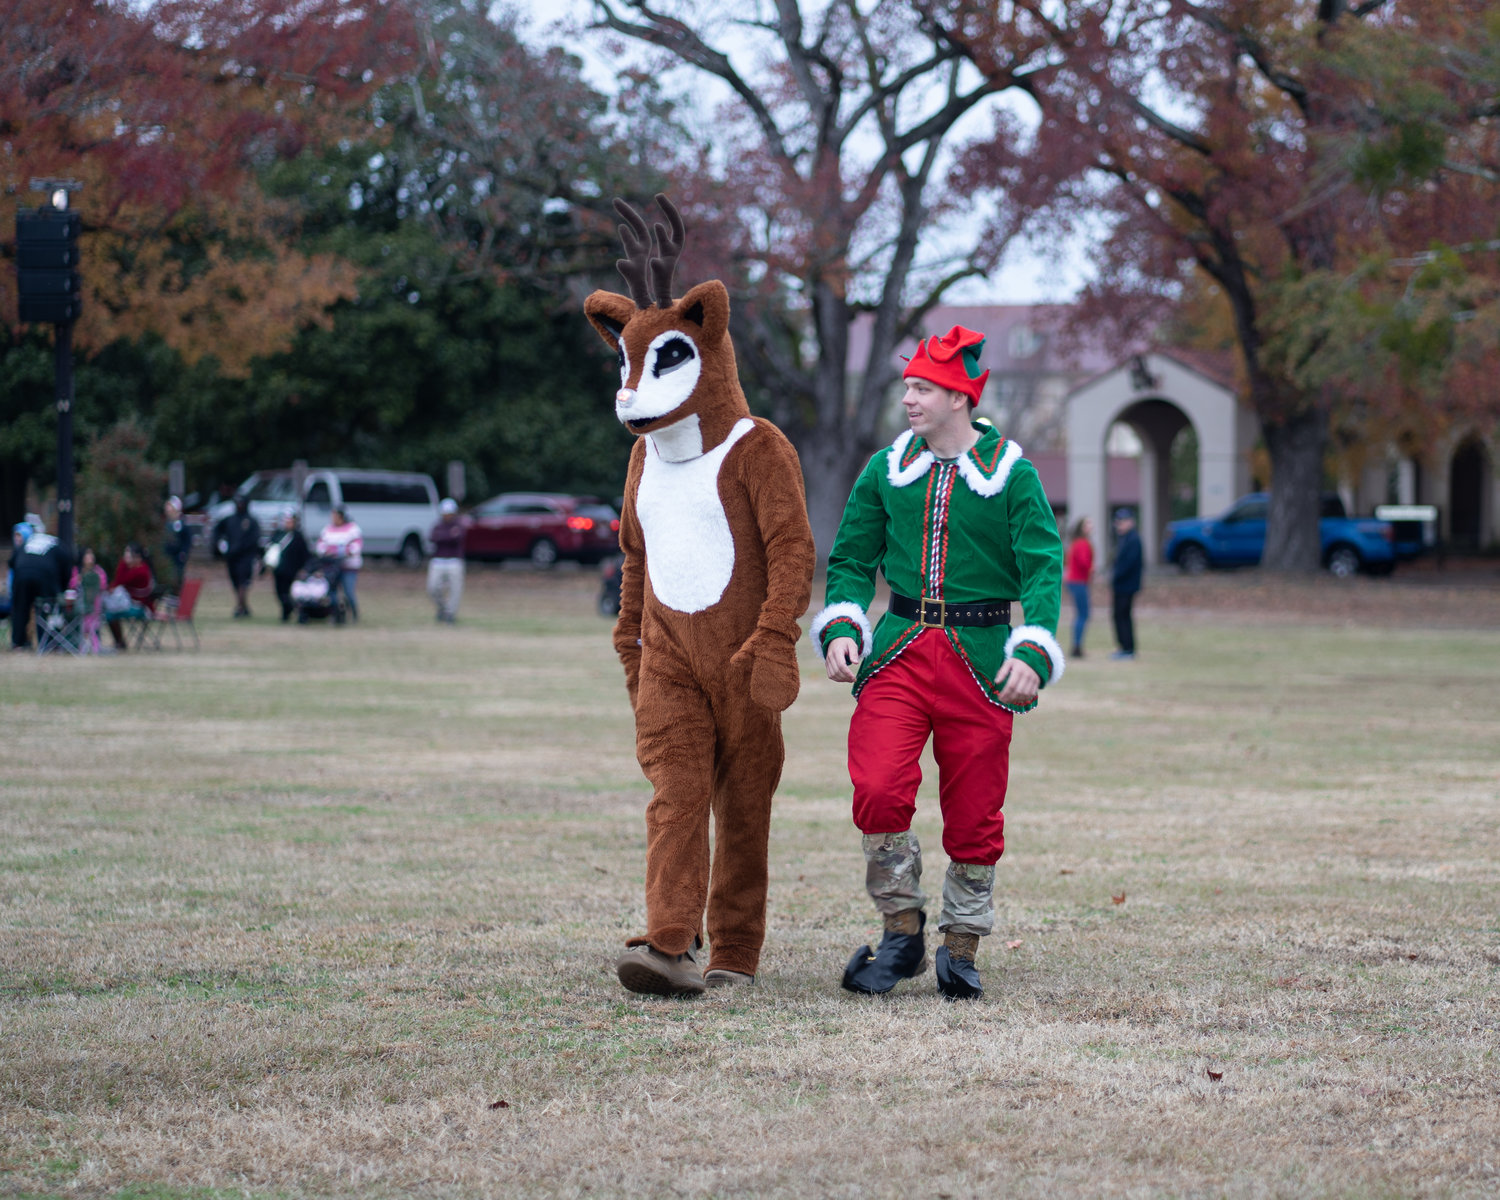 The Fort Bragg holiday tree lighting was held on Dec. 3 at the Main Post Parade Field.